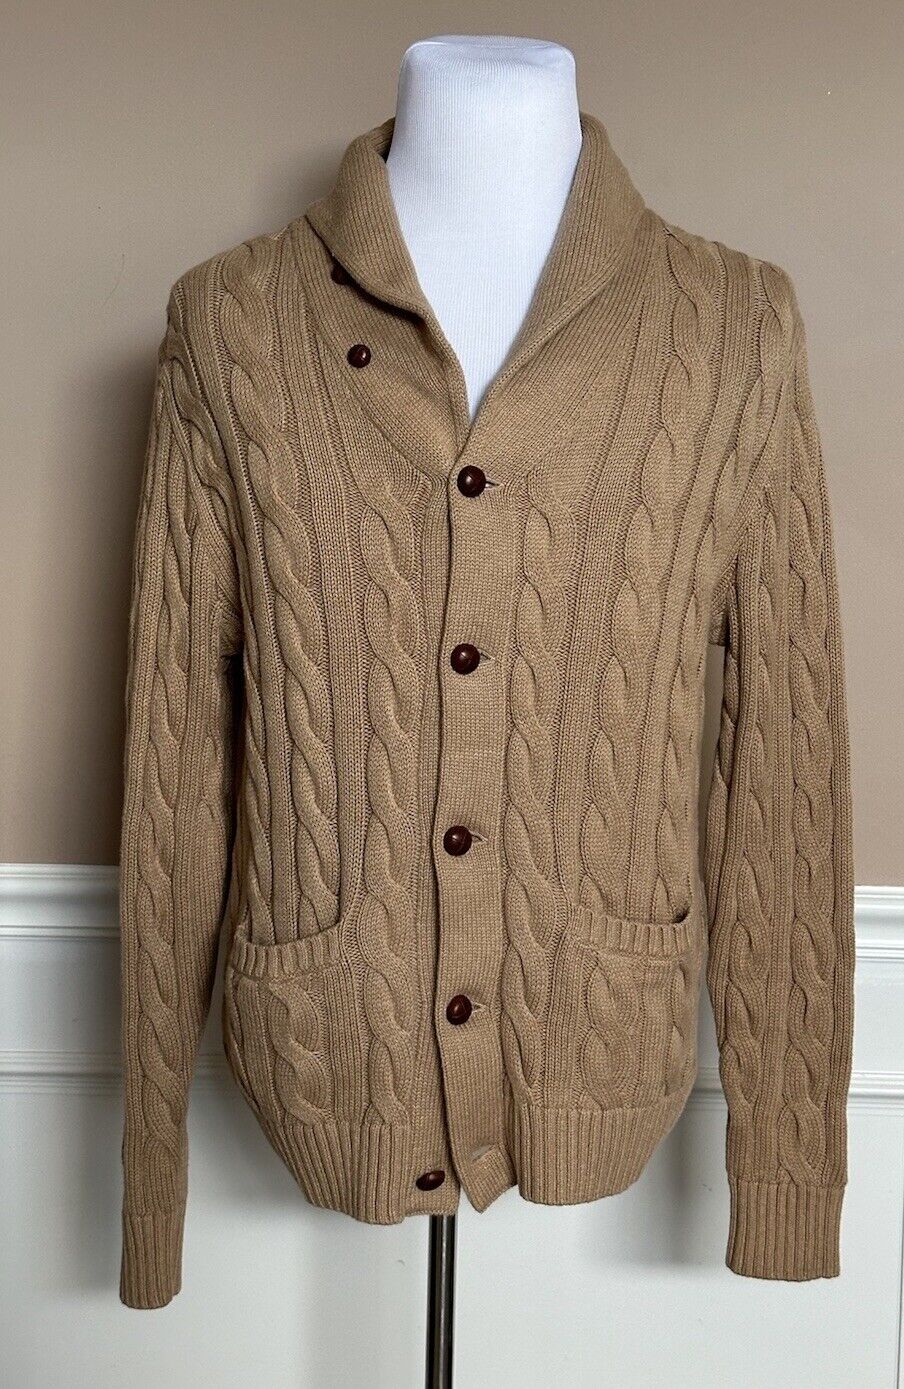 NWT $298 Polo Ralph Lauren Men's Brown Knit Button Down Sweater Jacket Large